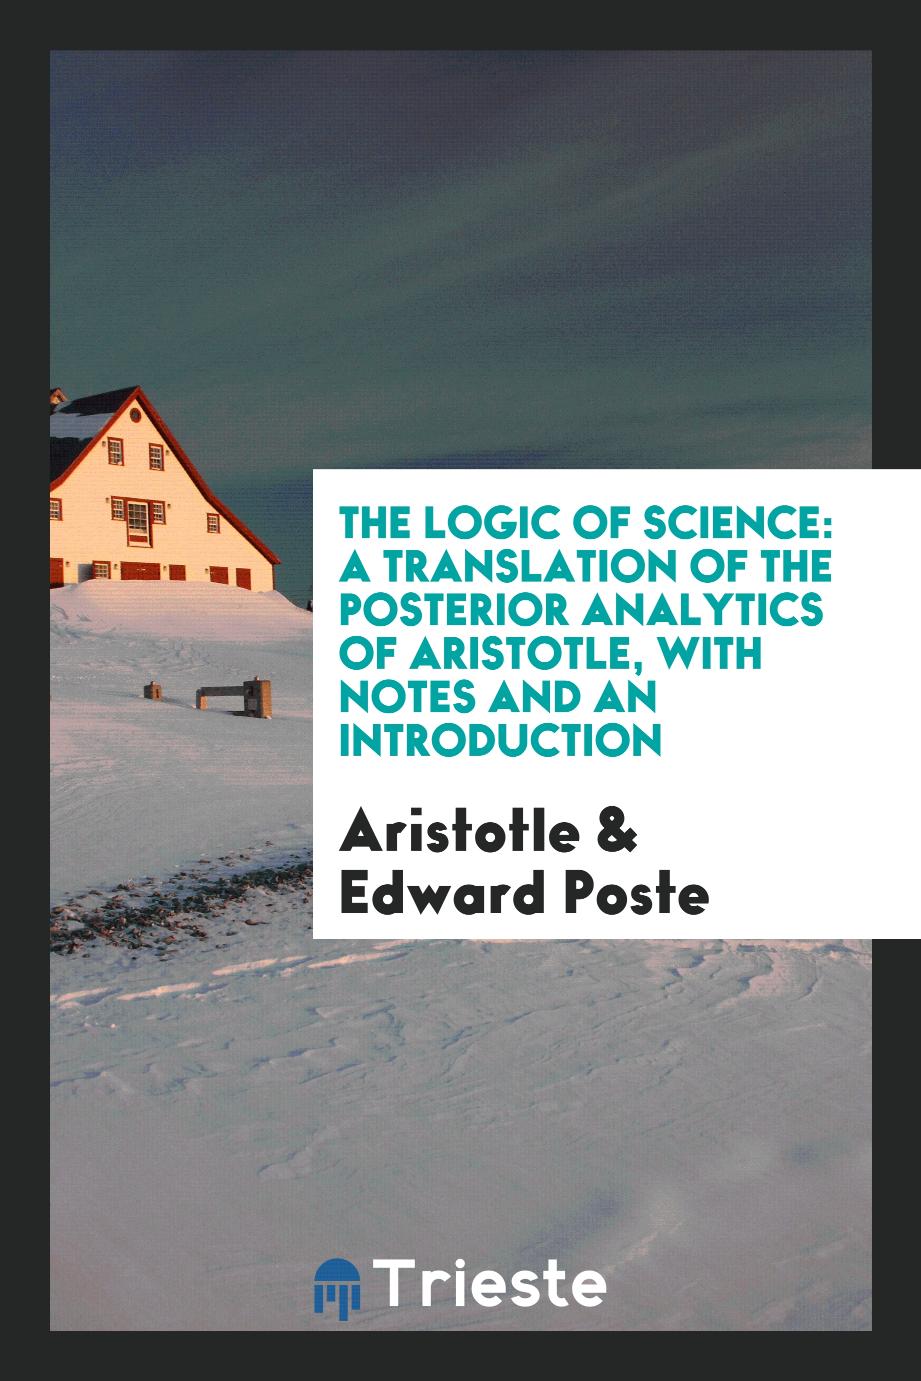 The Logic of Science: A Translation of the Posterior Analytics of Aristotle, with Notes and an Introduction